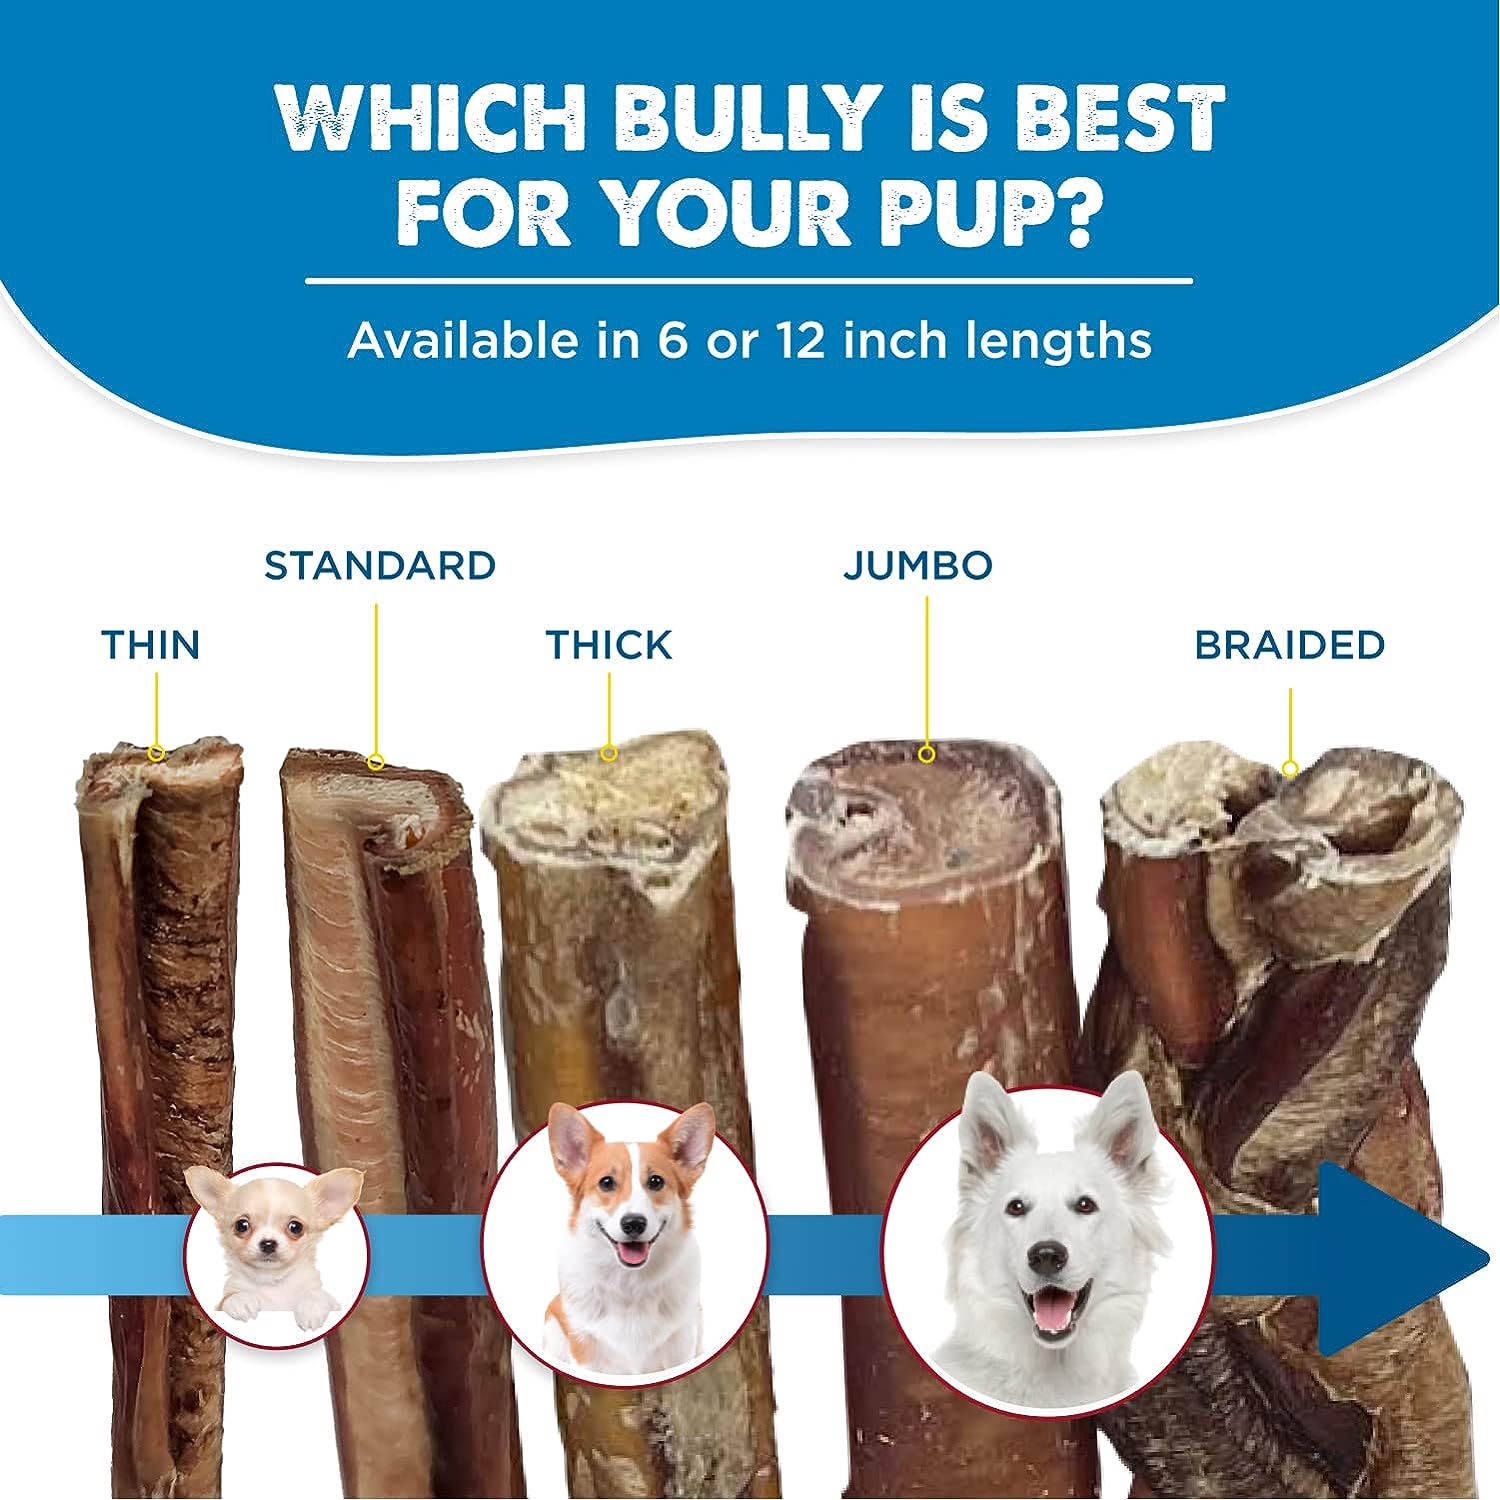 Best Bully Sticks All-Natural Premium 6 Inch Jumbo Bully Sticks for Large Dogs - USA Baked & Packed - 100% Grass-Fed Beef - Single Ingredient Grain & Rawhide Free Dog Chews - 25 Pack : Pet Supplies